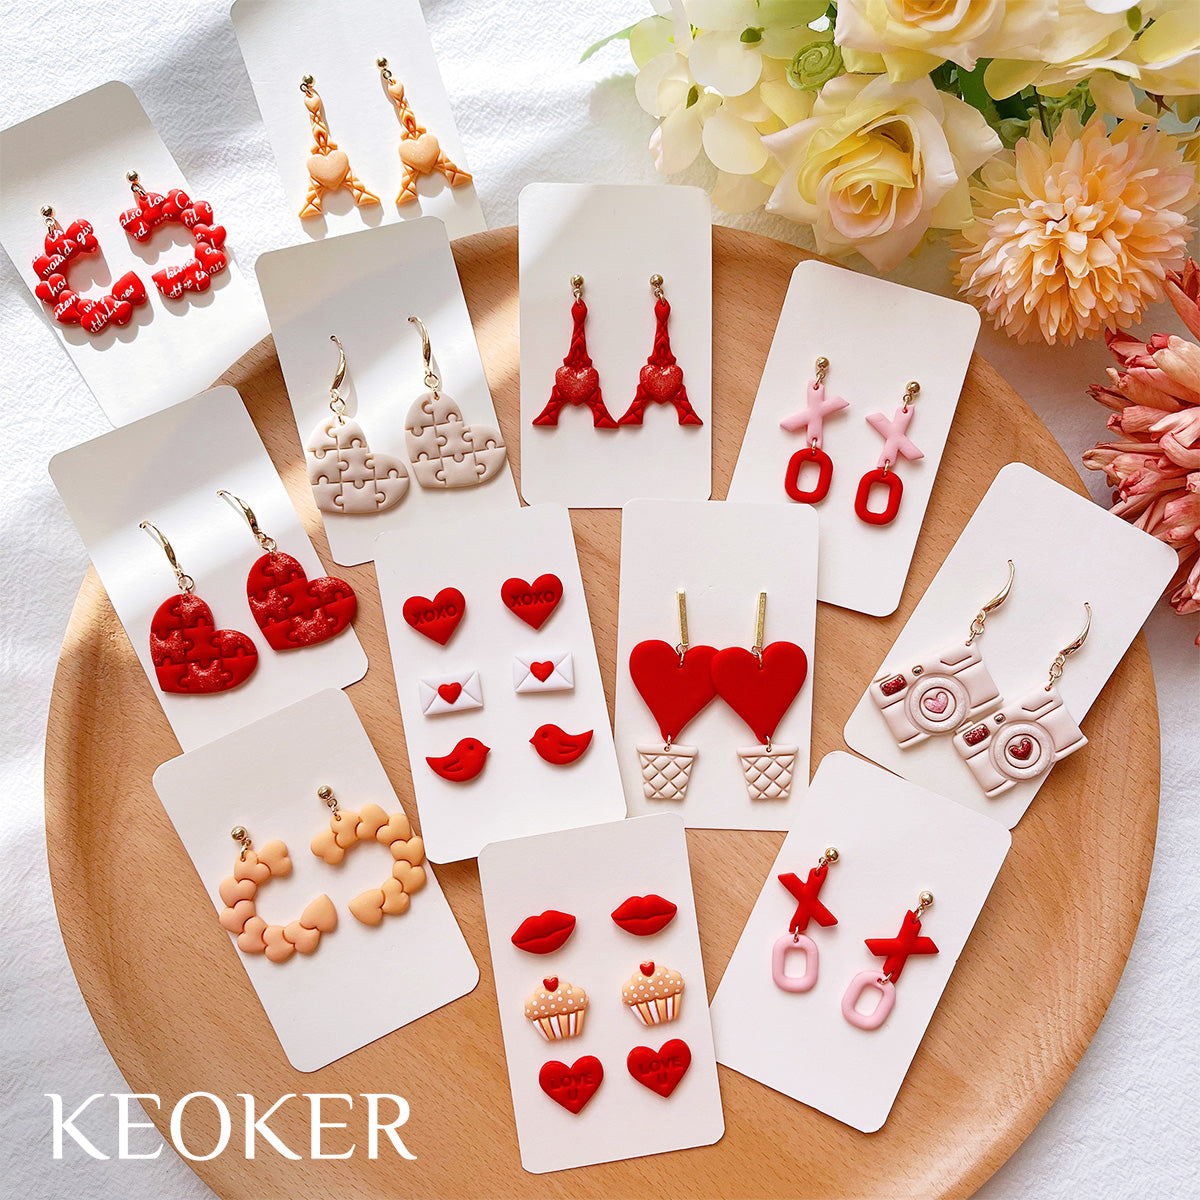 KEOKER Clay Cutters for Polymer Clay Jewelry, Fruit Polymer Clay